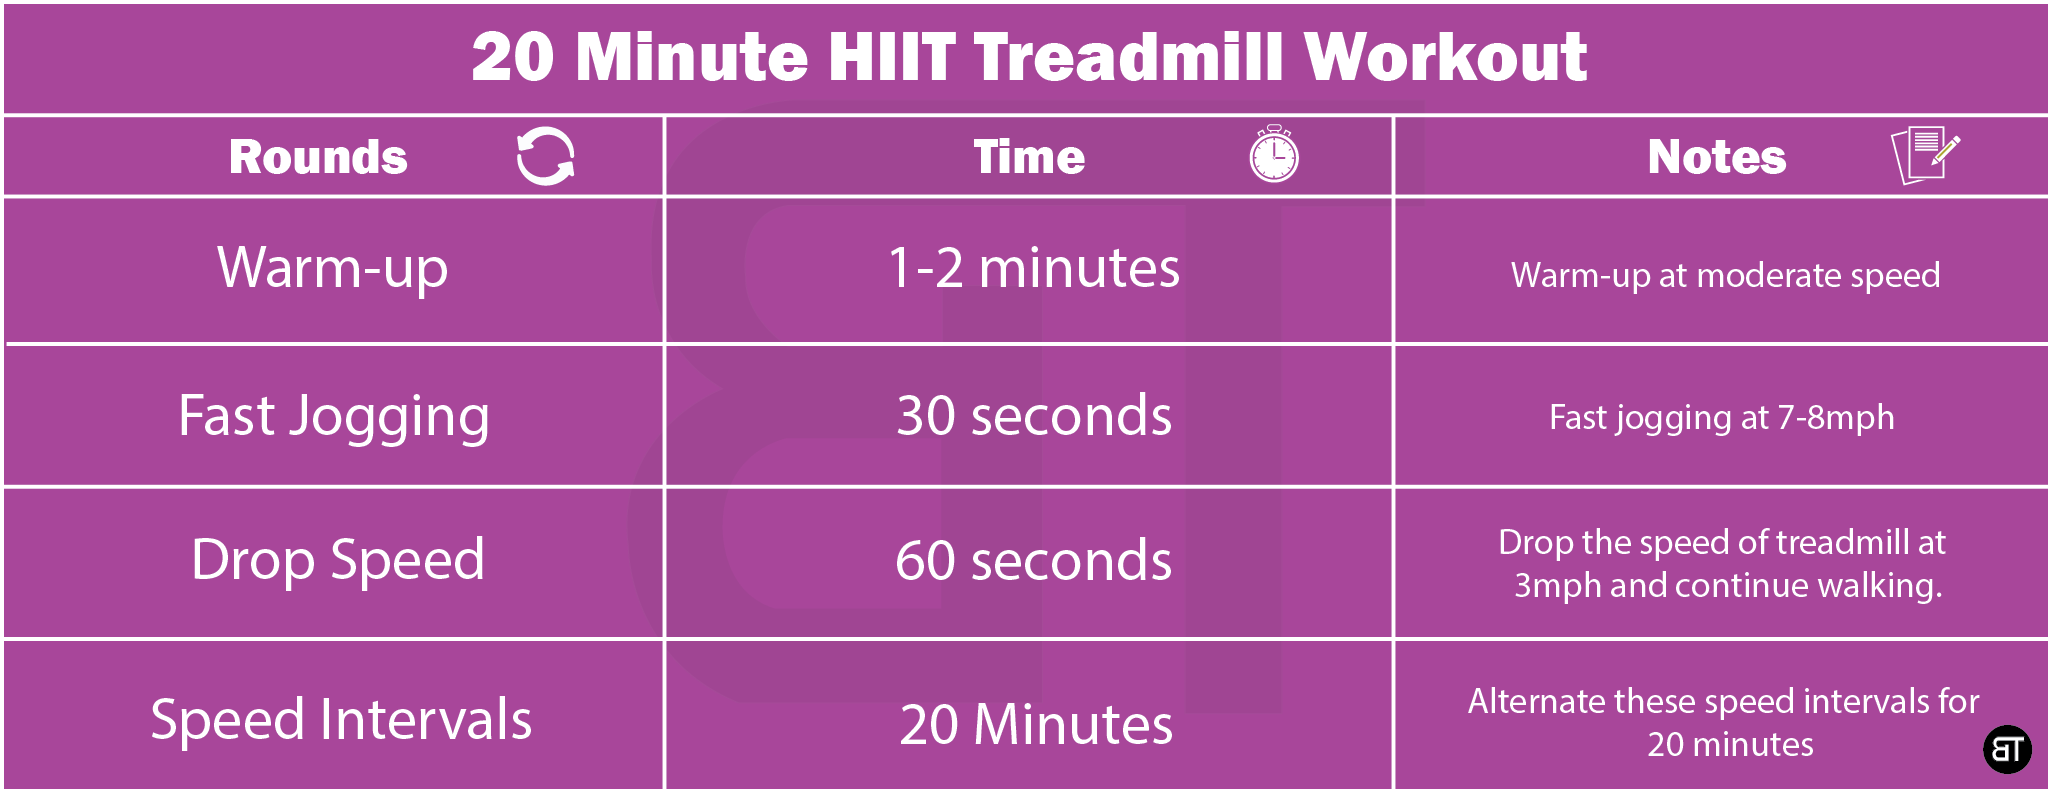 20 Minute HIIT Treadmill Workout